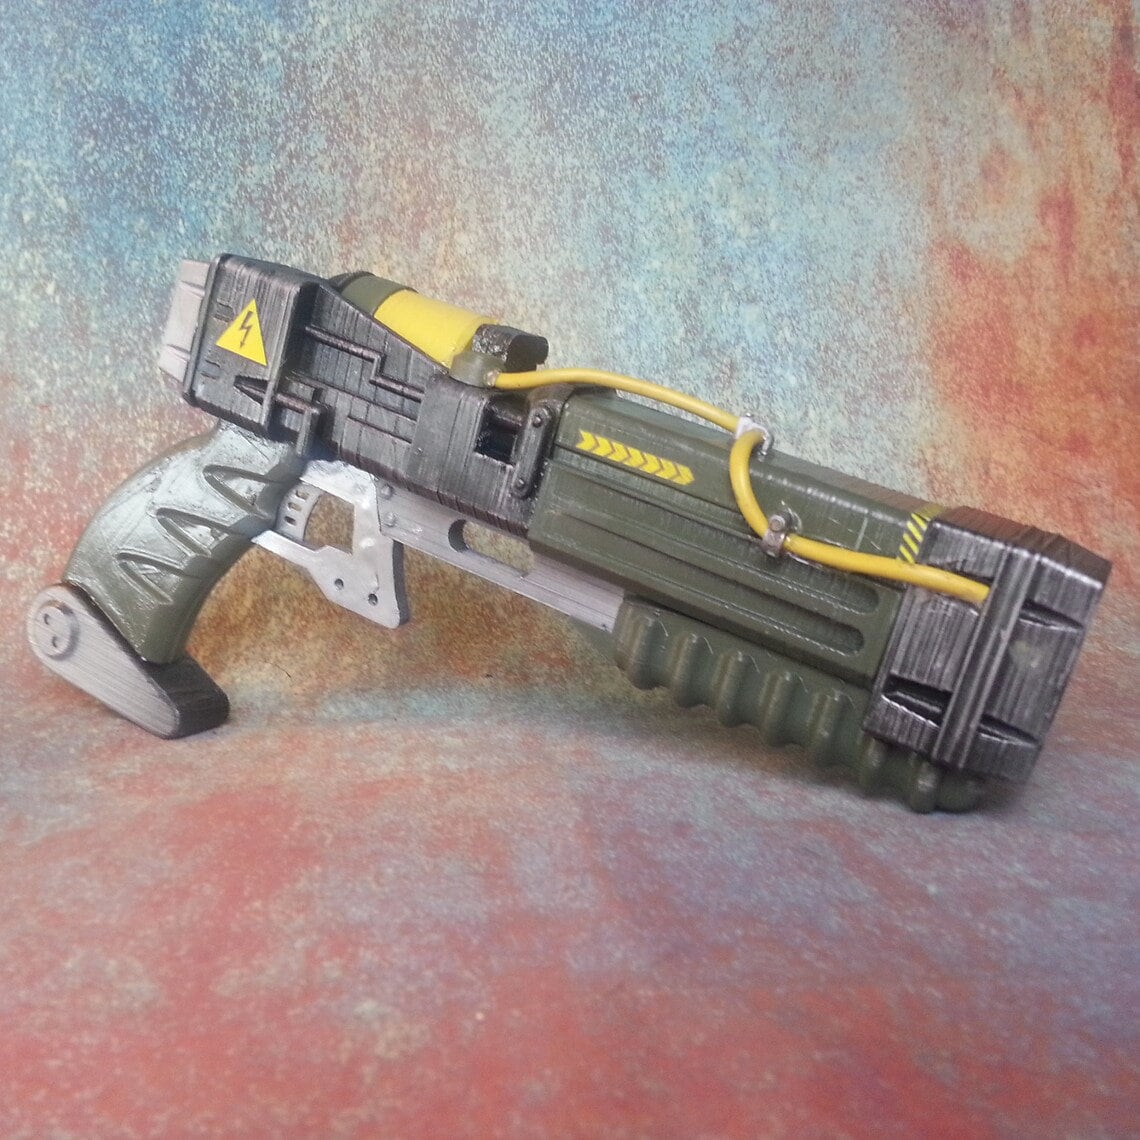 Fallout Laser Pistol Replica Old Faithful Laser Pistol Fallout 3 Costume  Prop AEP7 Laser Pistol Fallout Cosplay Fallout INSPIRED - Etsy